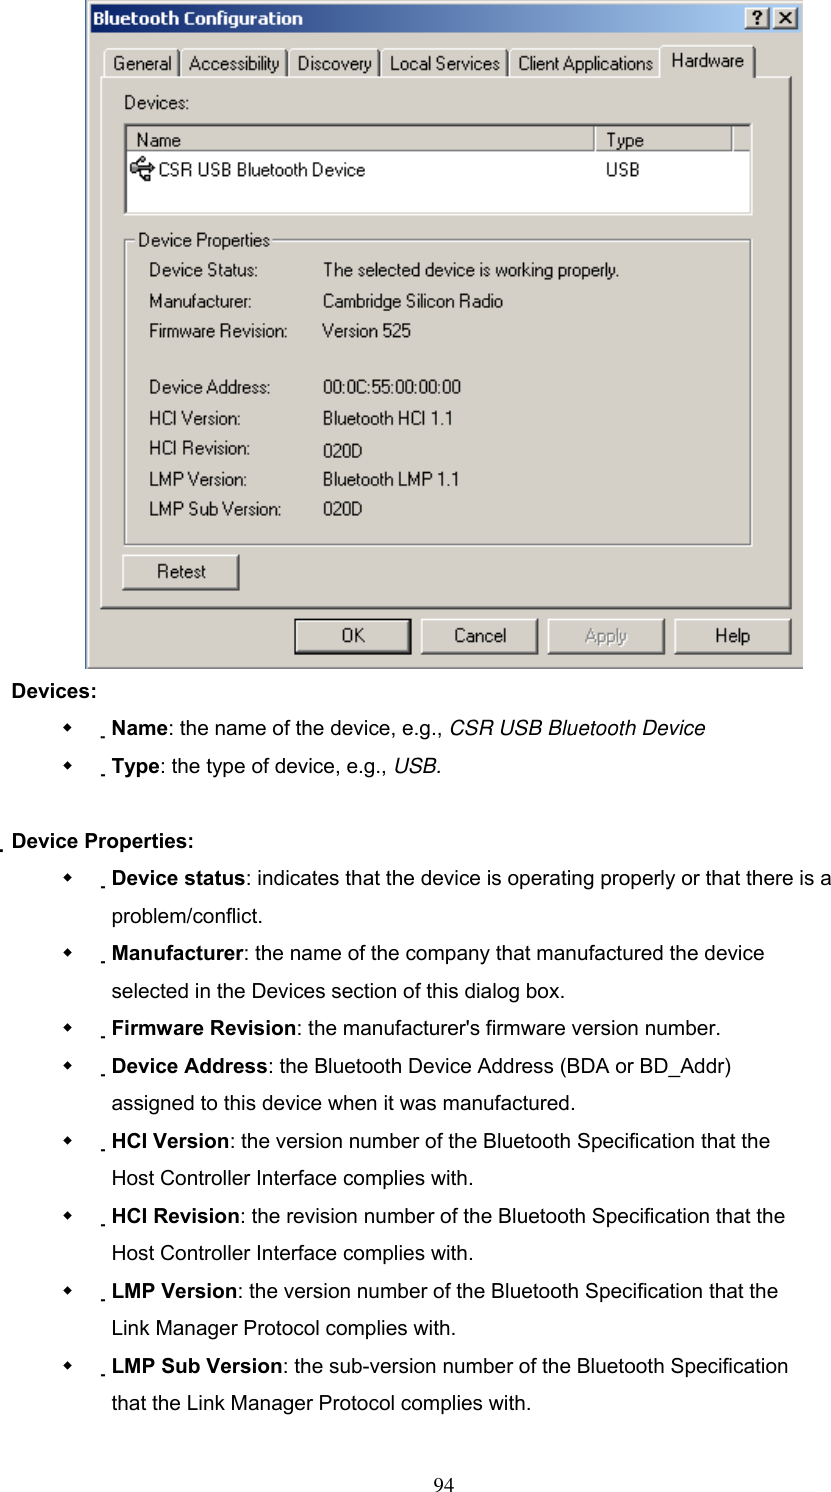  Devices:   Name: the name of the device, e.g., CSR USB Bluetooth Device   Type: the type of device, e.g., USB.  Device Properties:   Device status: indicates that the device is operating properly or that there is a problem/conflict.   Manufacturer: the name of the company that manufactured the device selected in the Devices section of this dialog box.   Firmware Revision: the manufacturer&apos;s firmware version number.   Device Address: the Bluetooth Device Address (BDA or BD_Addr) assigned to this device when it was manufactured.   HCI Version: the version number of the Bluetooth Specification that the Host Controller Interface complies with.   HCI Revision: the revision number of the Bluetooth Specification that the Host Controller Interface complies with.   LMP Version: the version number of the Bluetooth Specification that the Link Manager Protocol complies with.   LMP Sub Version: the sub-version number of the Bluetooth Specification that the Link Manager Protocol complies with.  94 